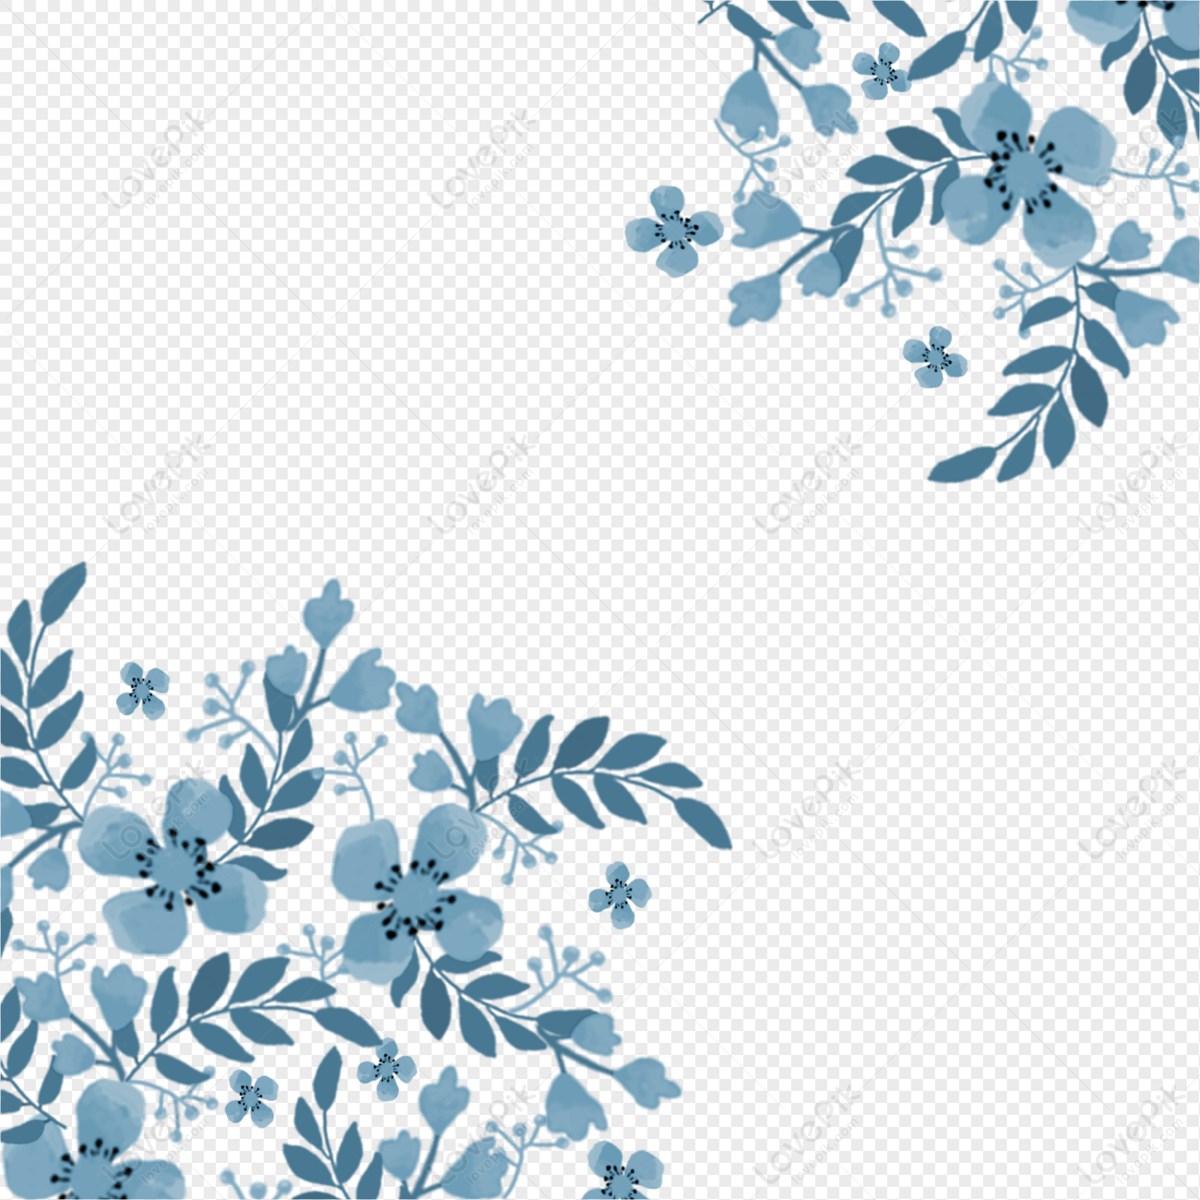 Blue Flowers Border Png Images With Transparent Background | Free Download  On Lovepik